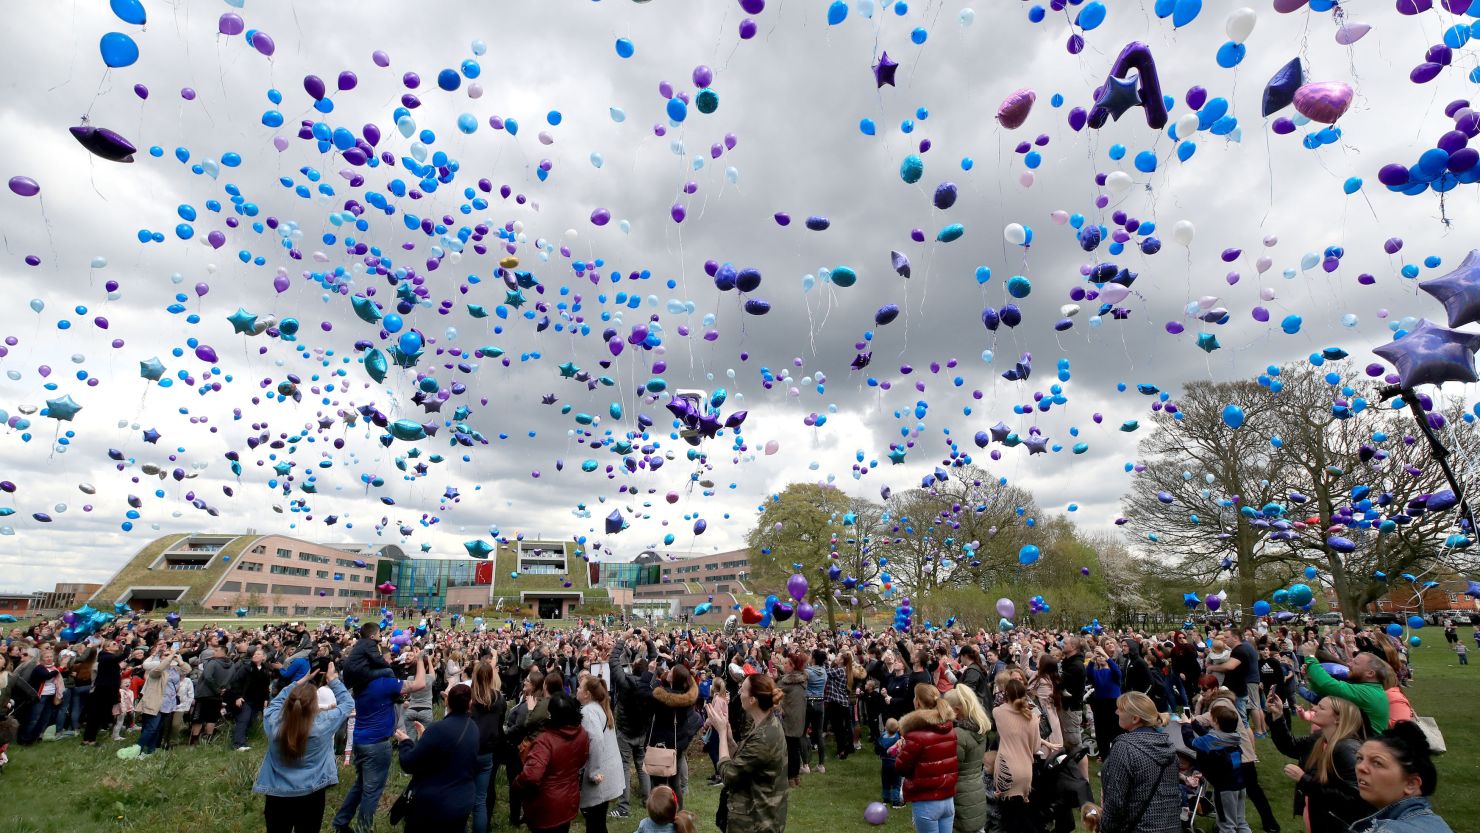 Balloons were released into the air to pay tribute to the terminally ill toddler. 